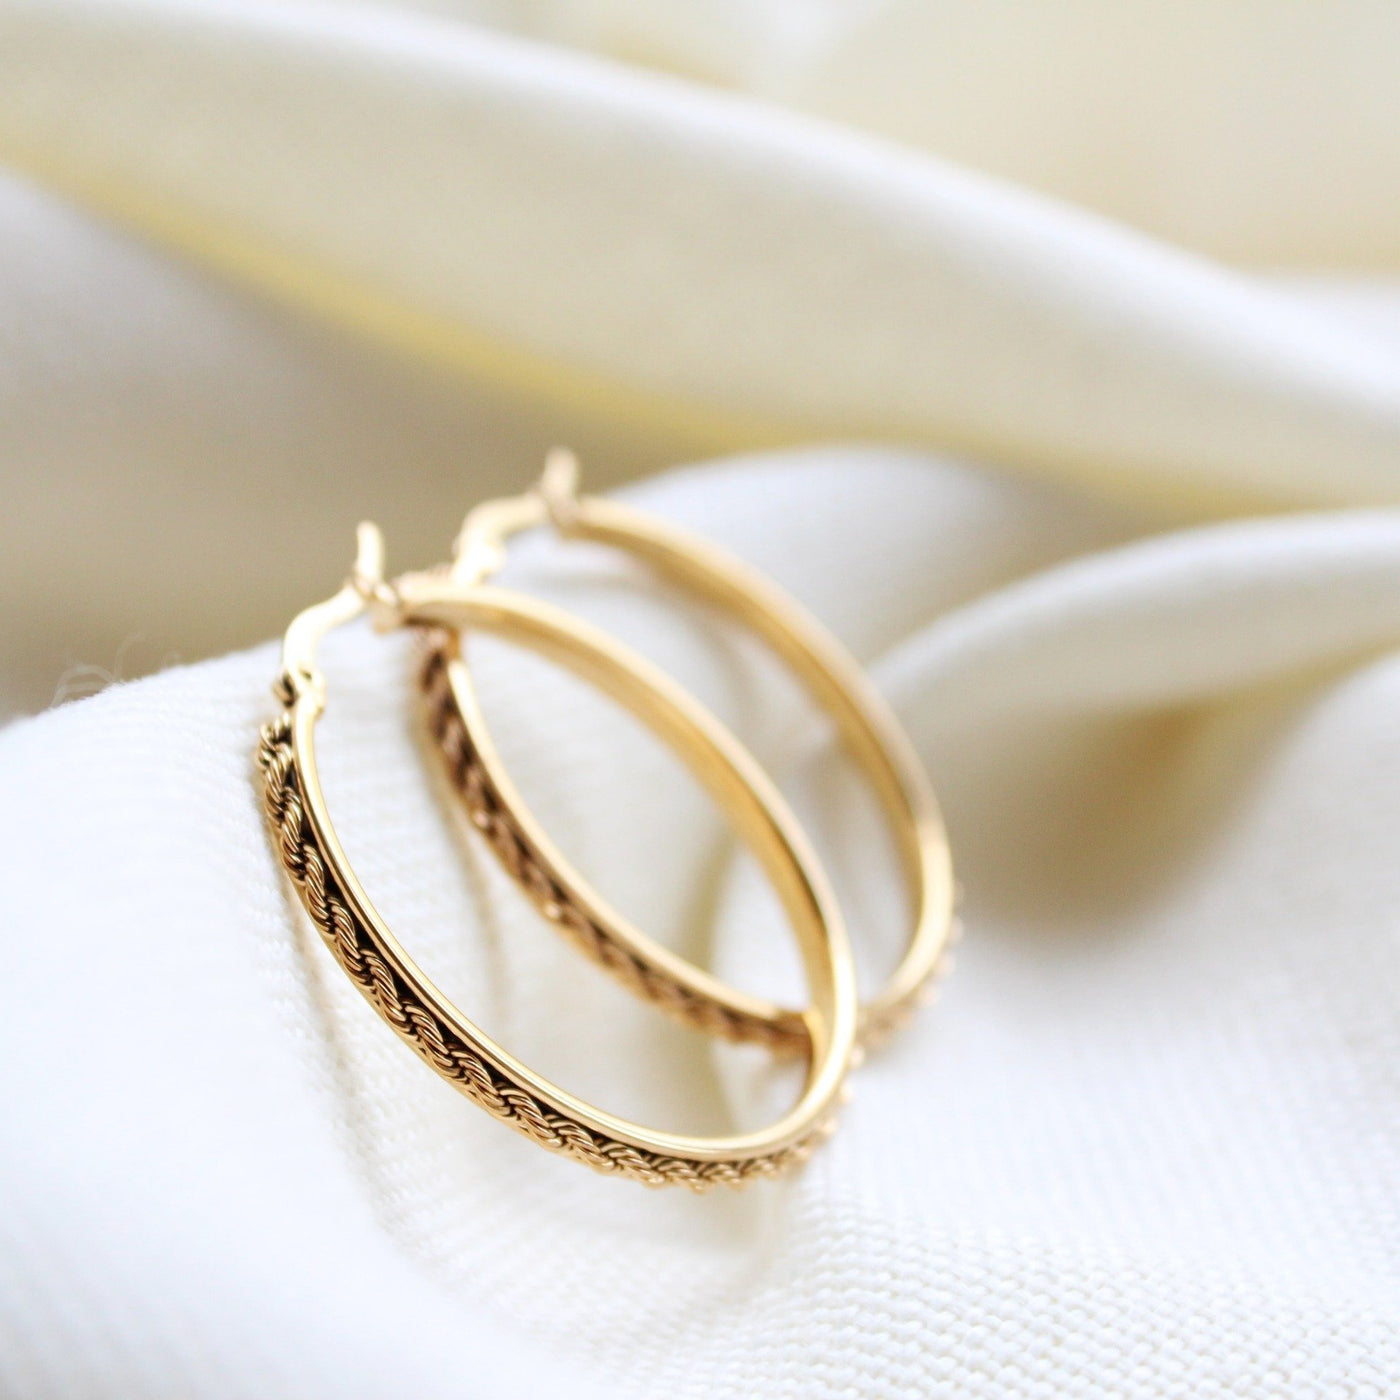 Gold-Plated Earrings - Maral Kunst Jewelry